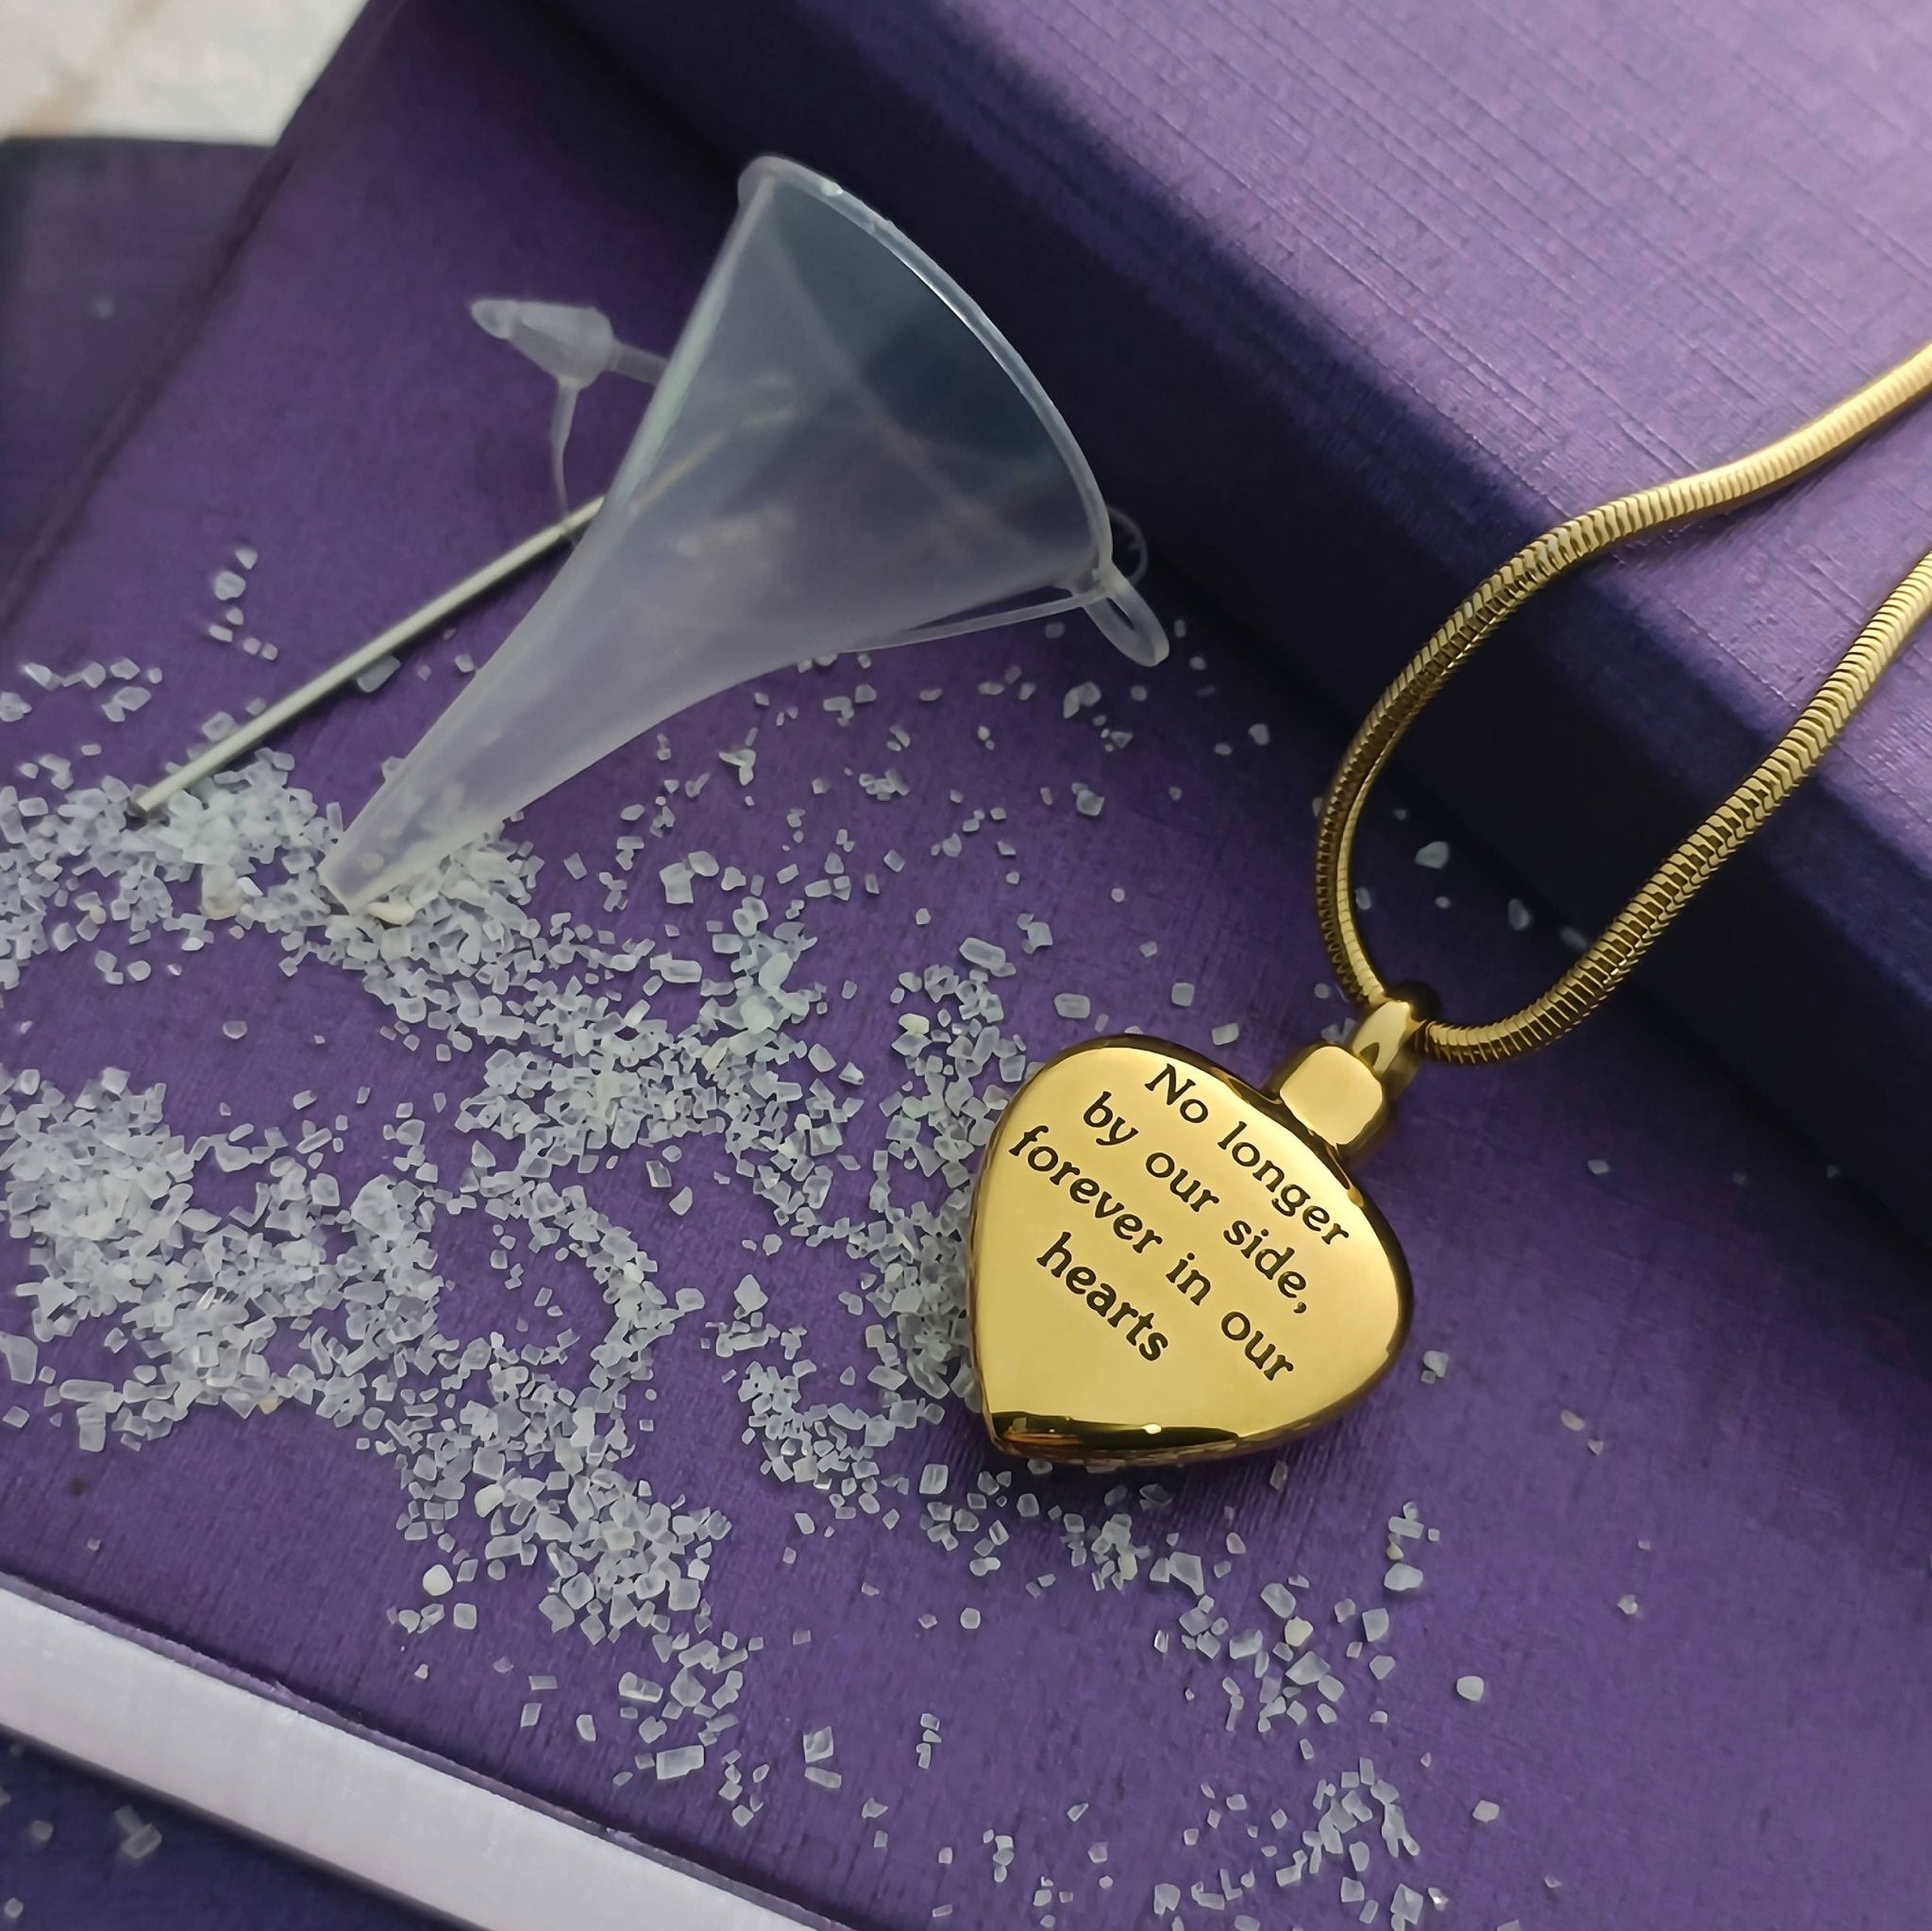 Always Love Cremation Necklace - Memorial & Cremation Jewellery by Belle Fever